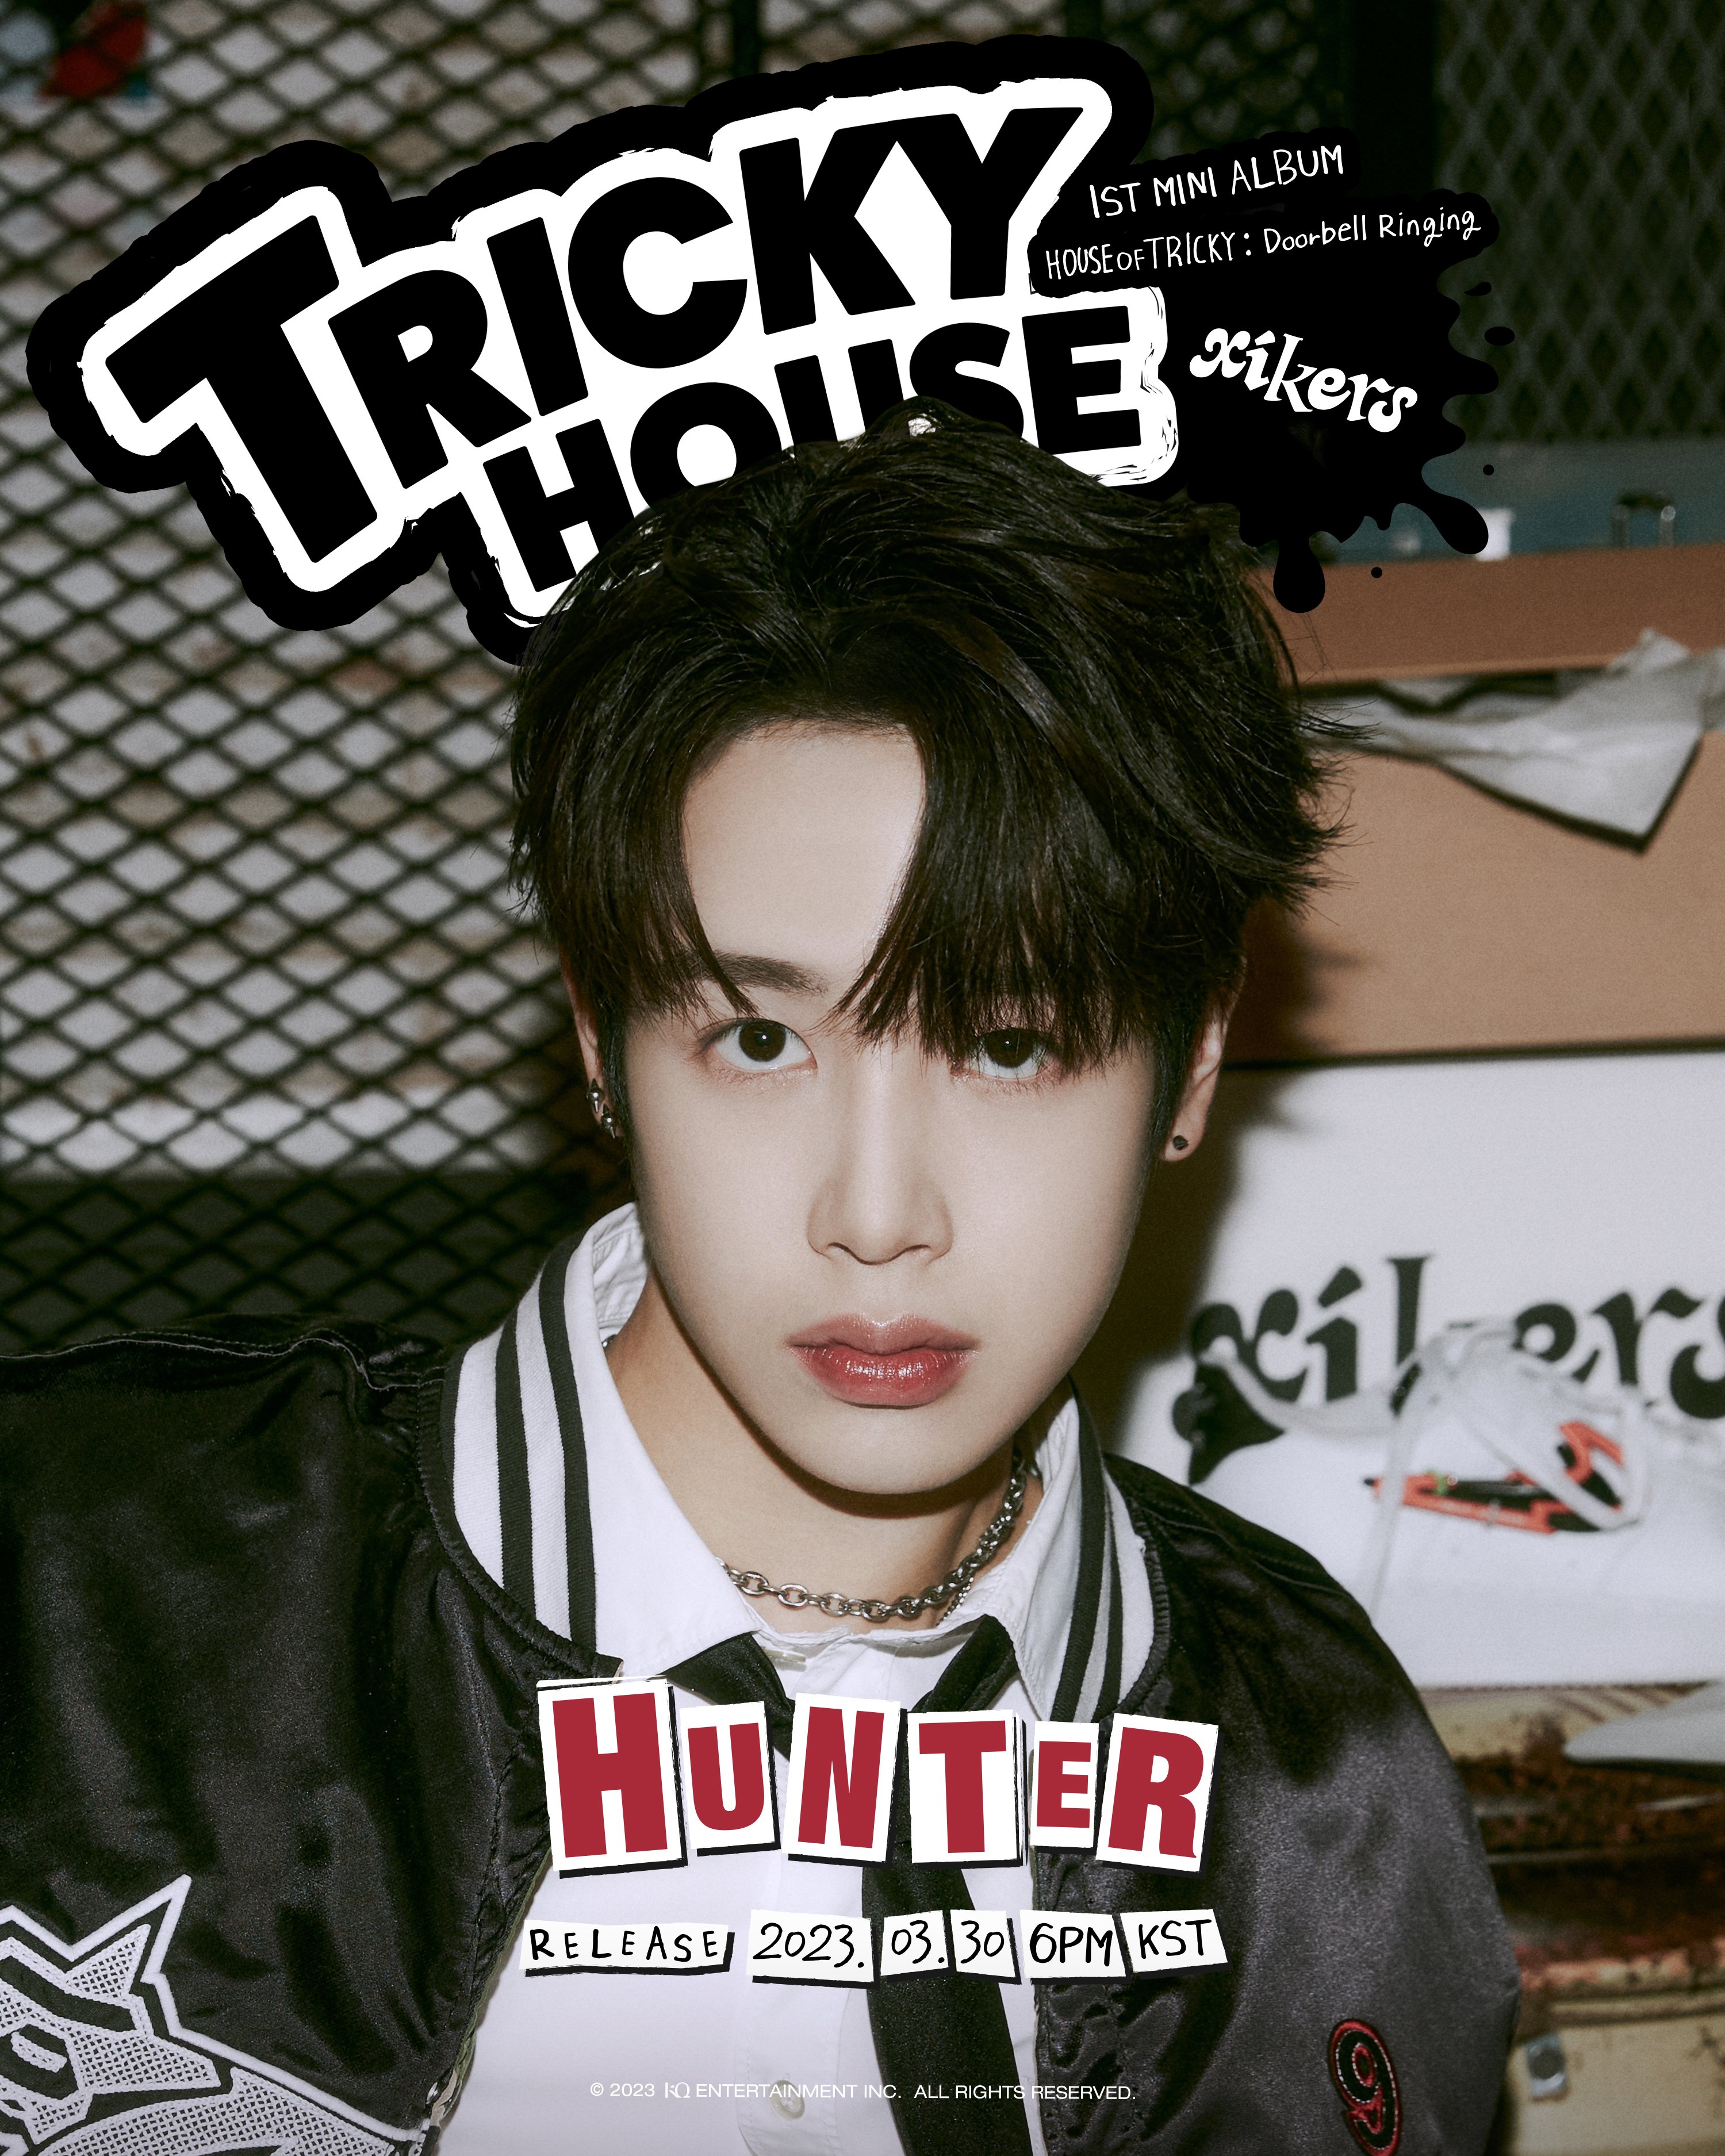 xikers(싸이커스) on Twitter: "[📷] xikers - 'TRICKY' CONCEPT POSTER 2 '헌터(HUNTER)'  ⠀ RELEASE 2023. 03. 30 6PM(KST) ⠀ #xikers #싸이커스 #헌터 #HUNTER #1STMINIALBUM  #HOUSE_OF_TRICKY #Doorbell_Ringing #KQ https://t.co/EClcWrkLgg" / Twitter